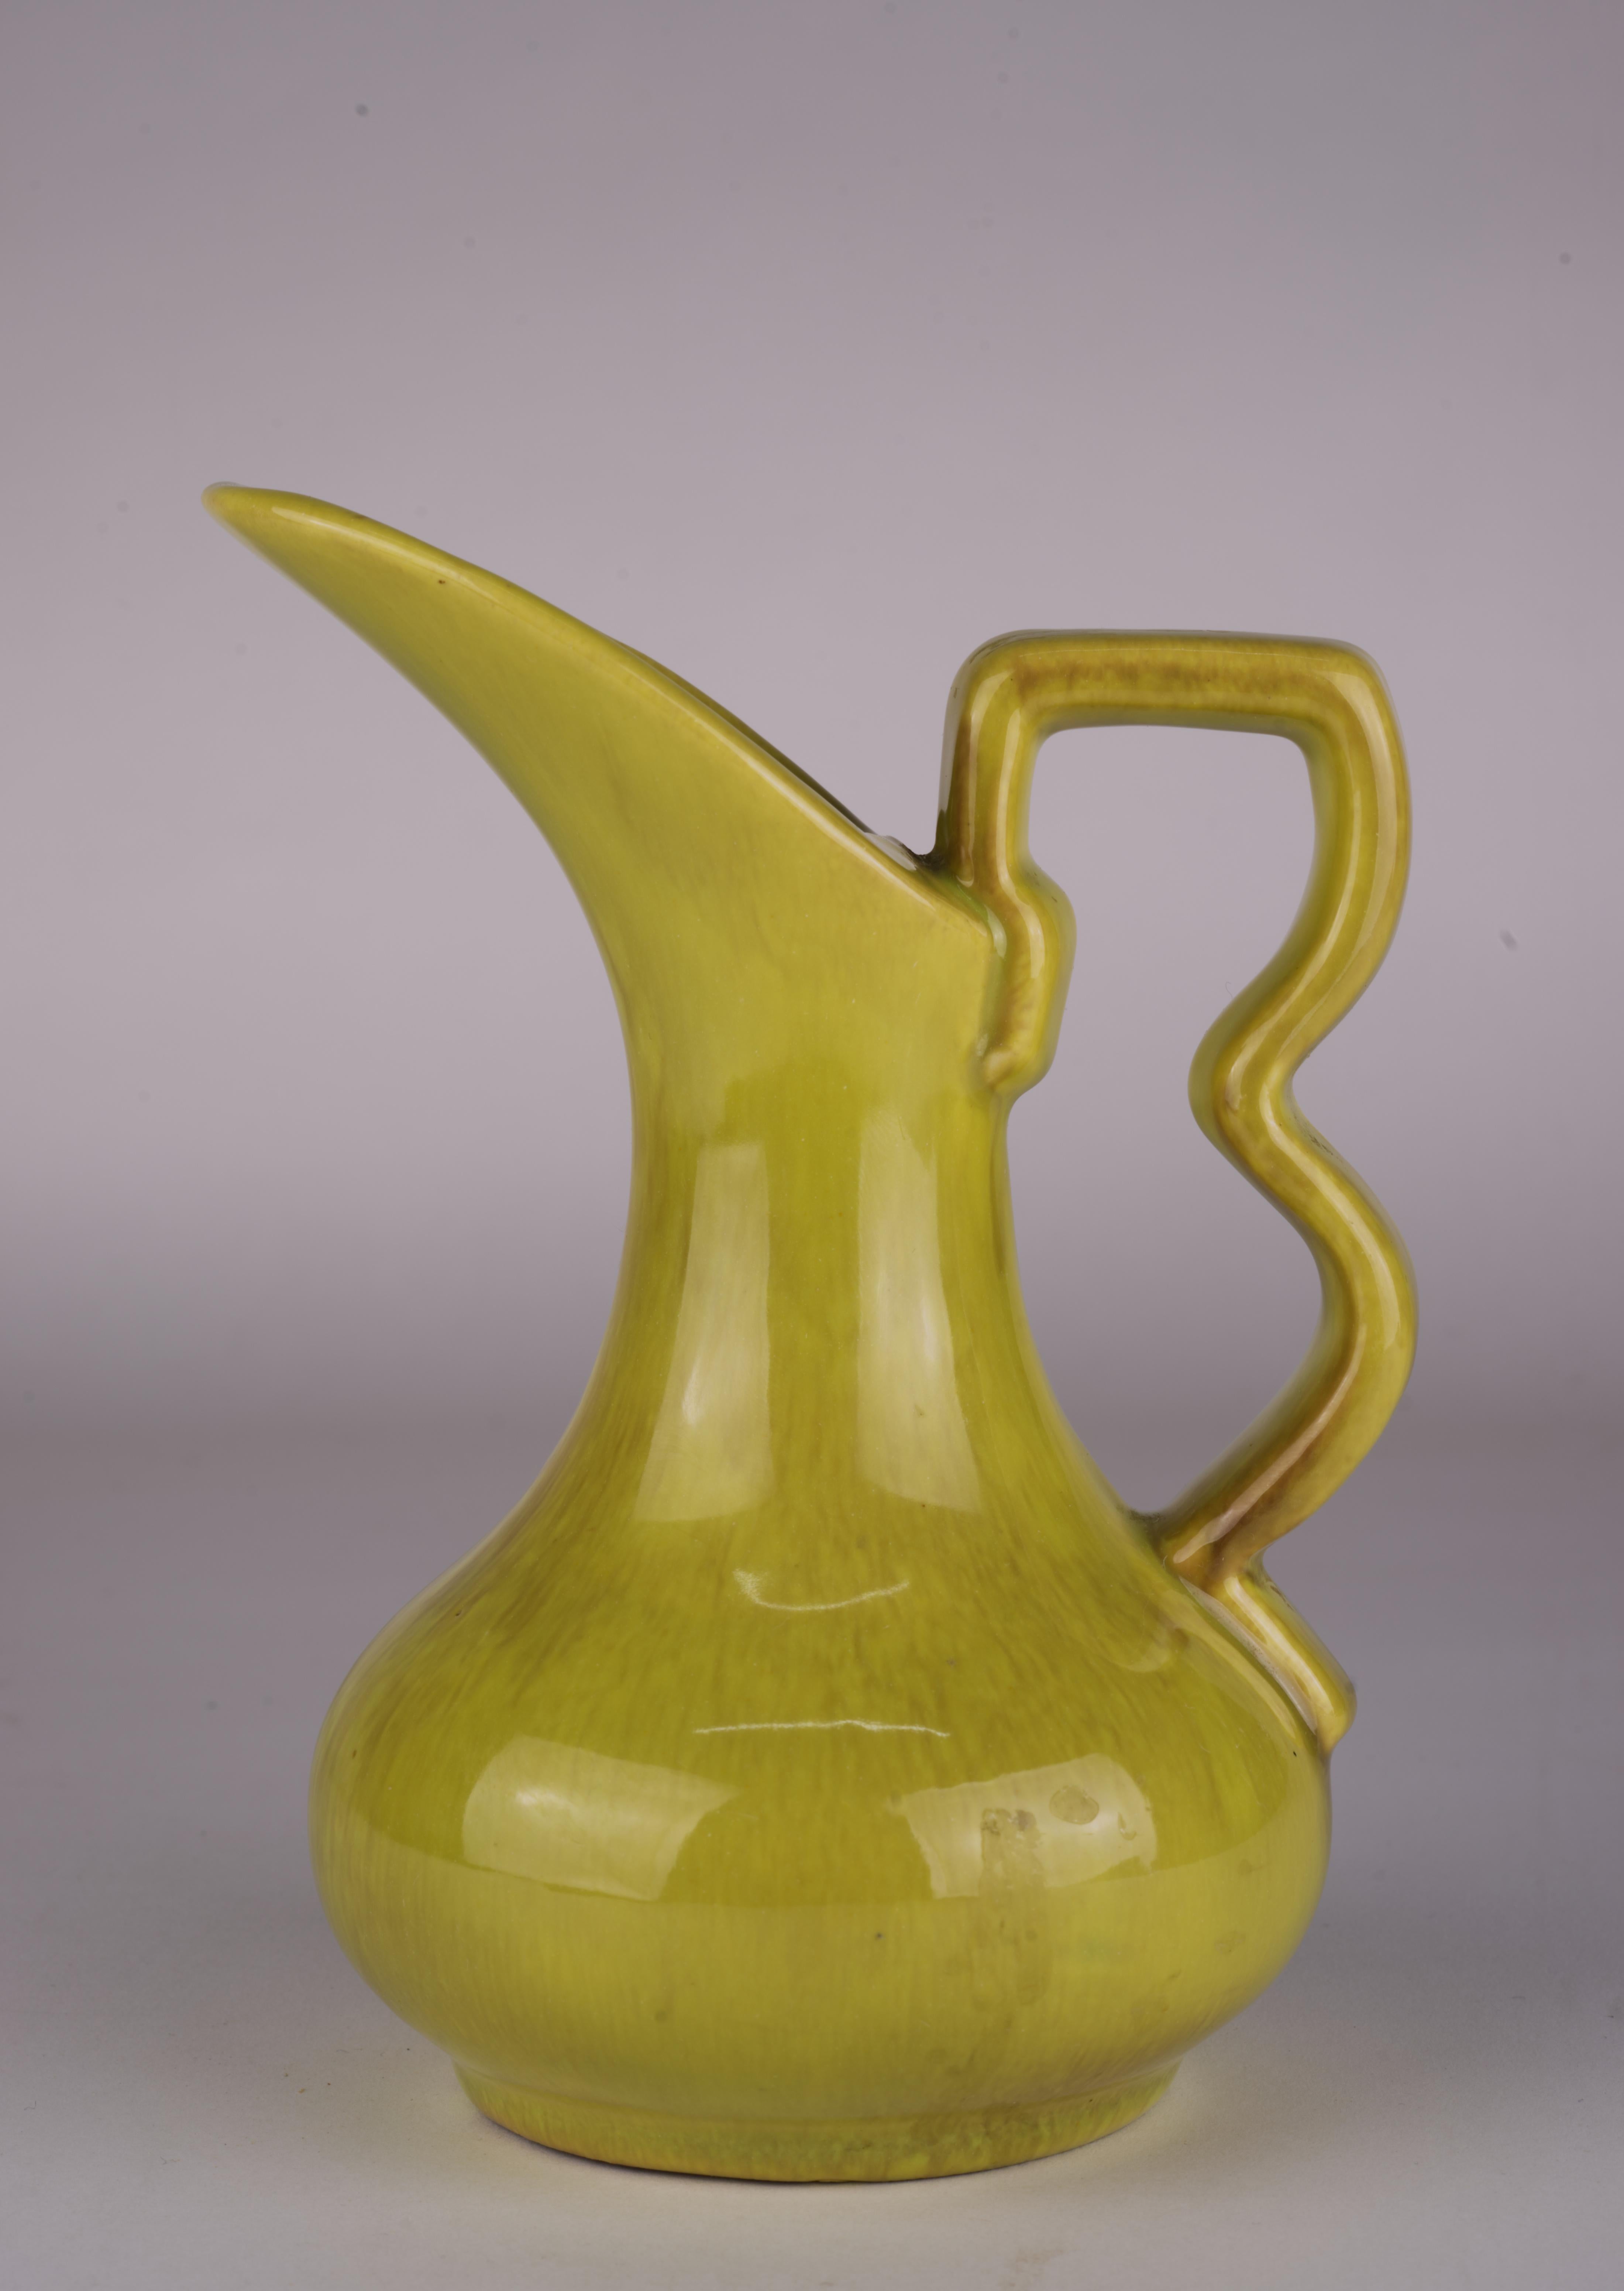 20th Century Gonder Pottery Bud Vase Ewer in Chartreuse Drip Glaze 1940s-1950s For Sale